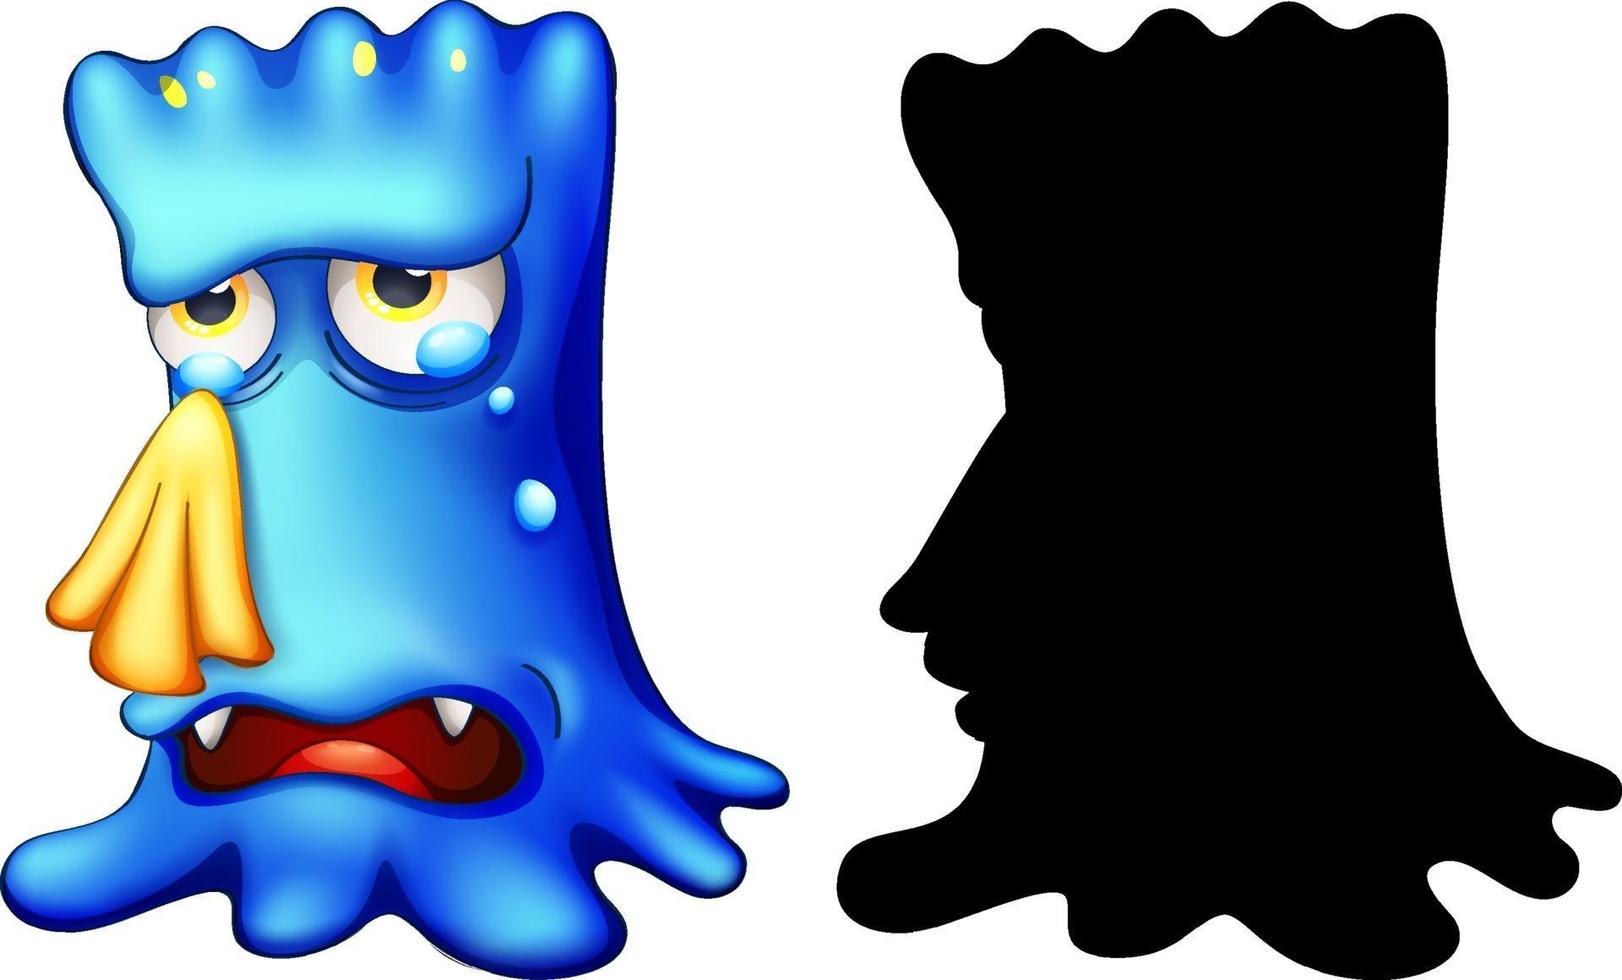 Blue monster crying with its silhouette on white background vector